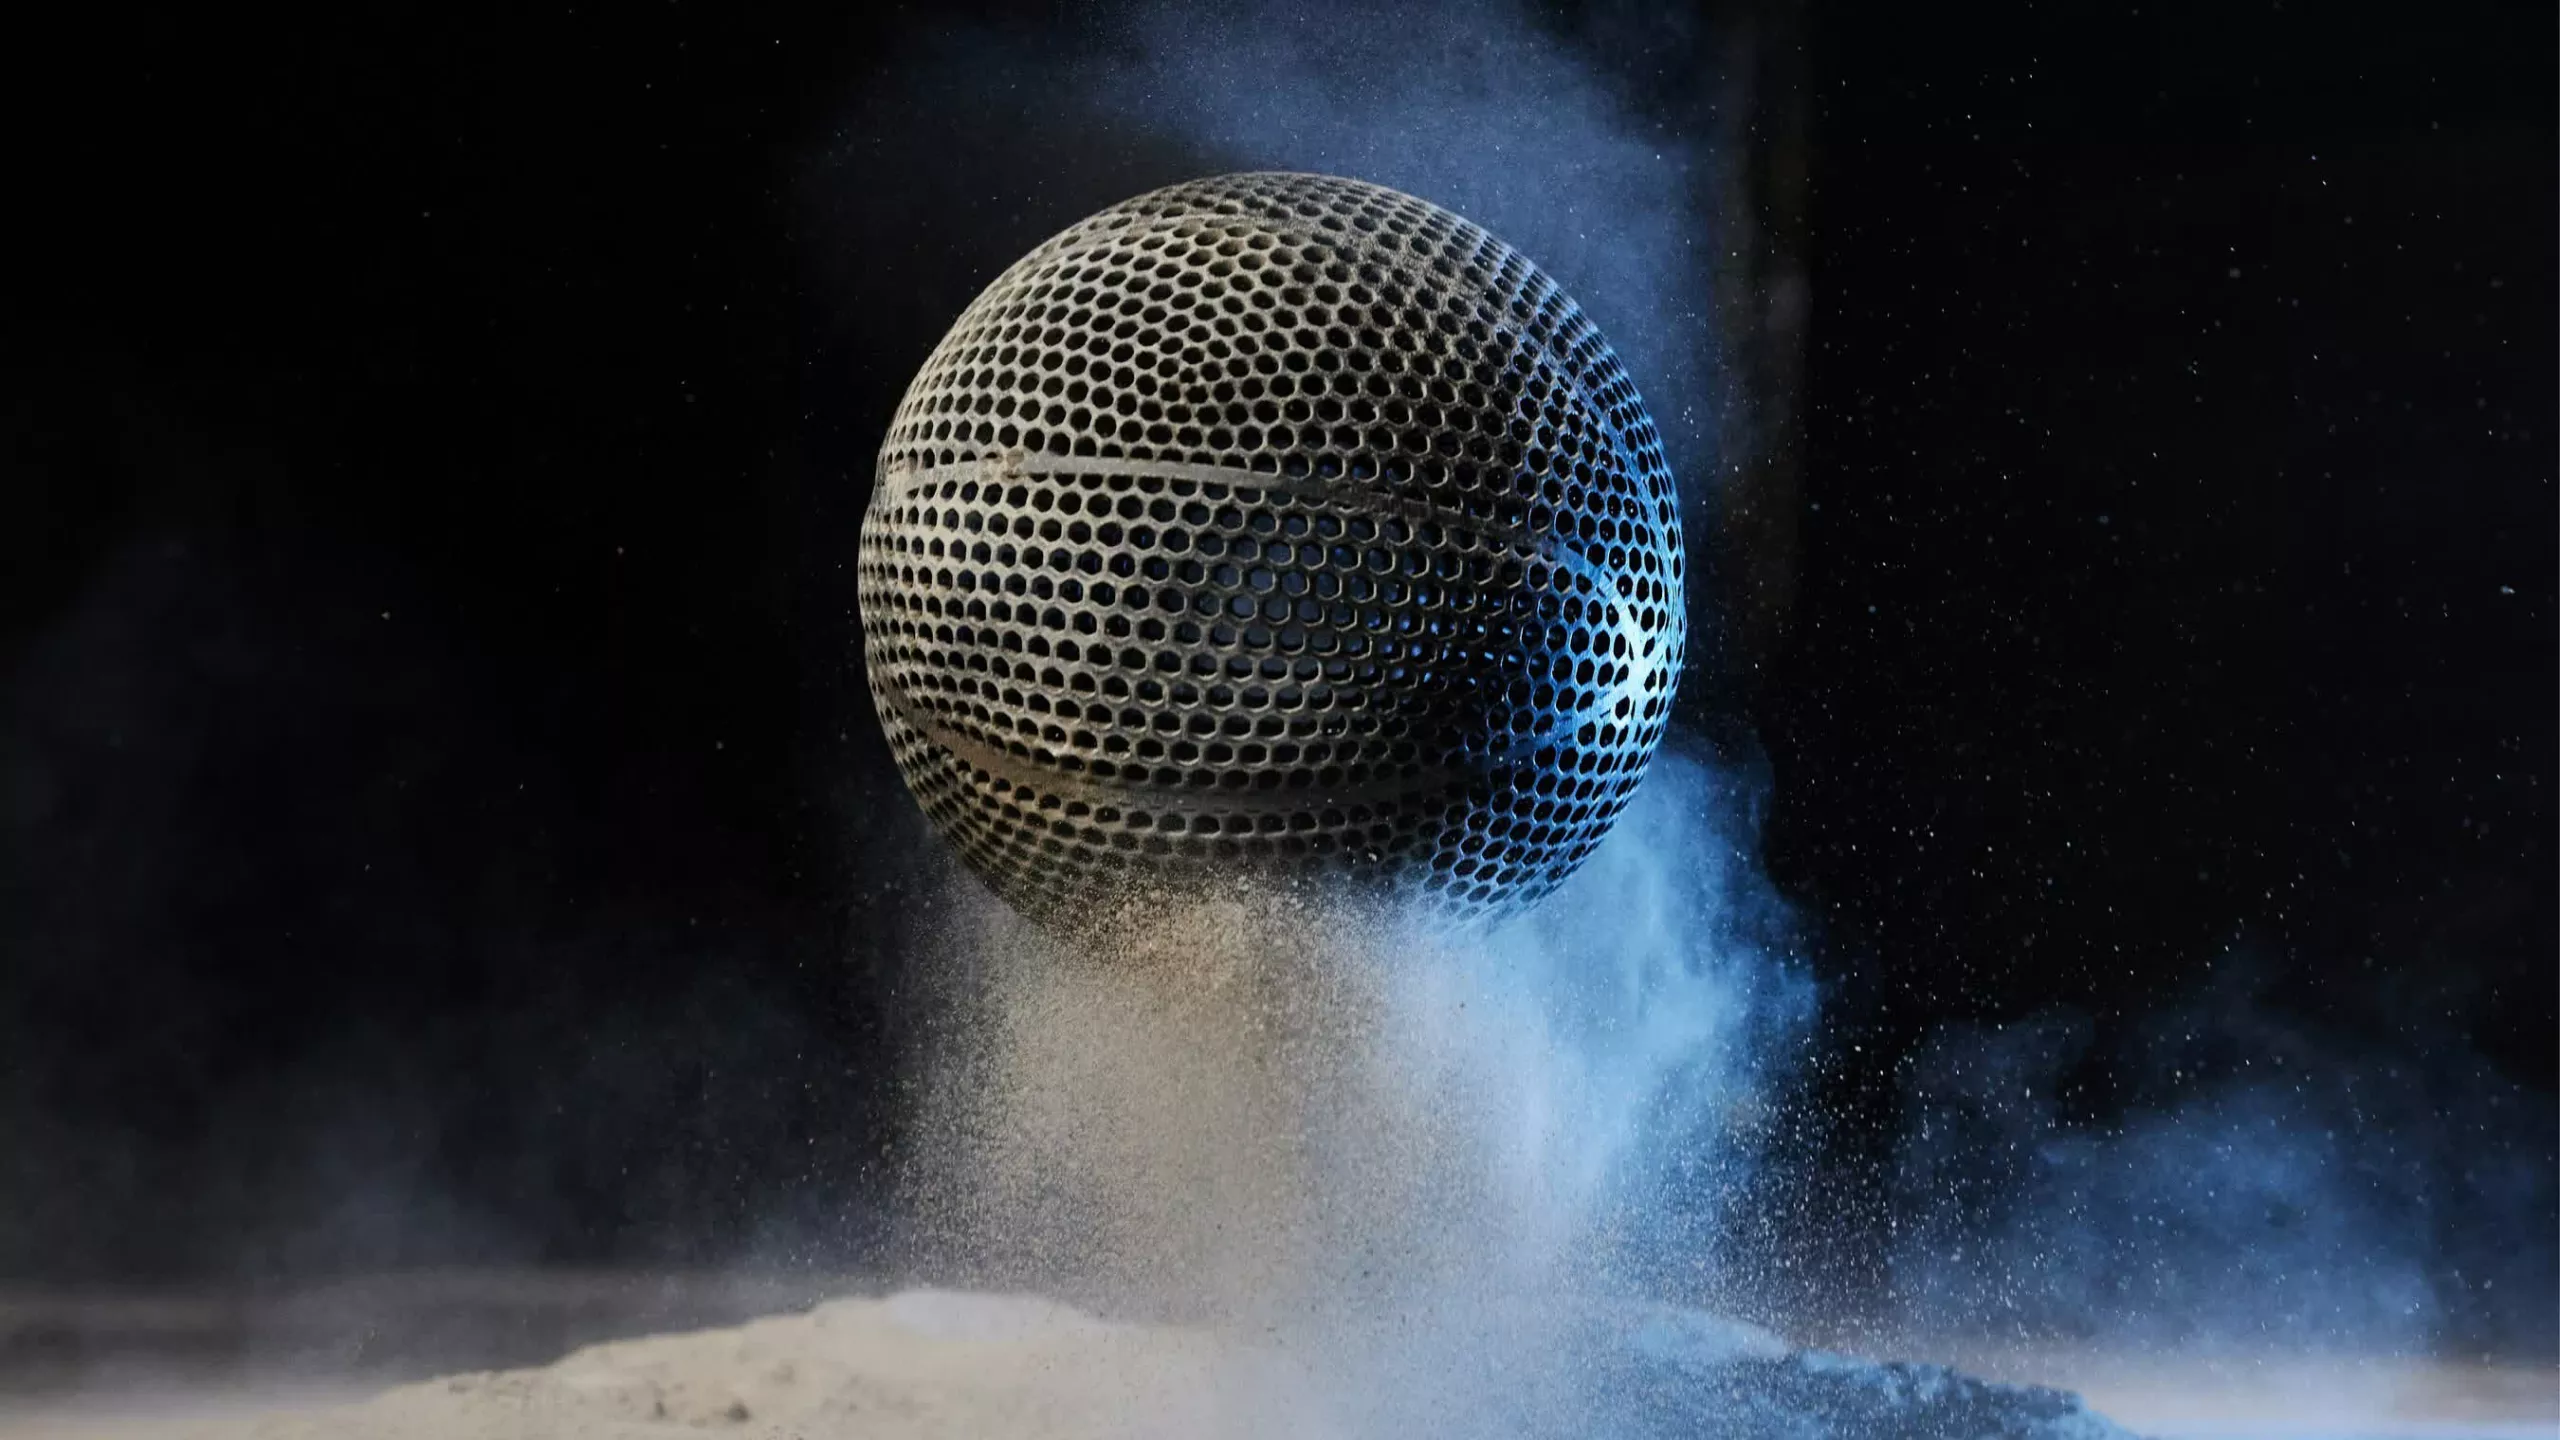 Wilson unveils airless 3D-printed basketball that nearly meets NBA regulation